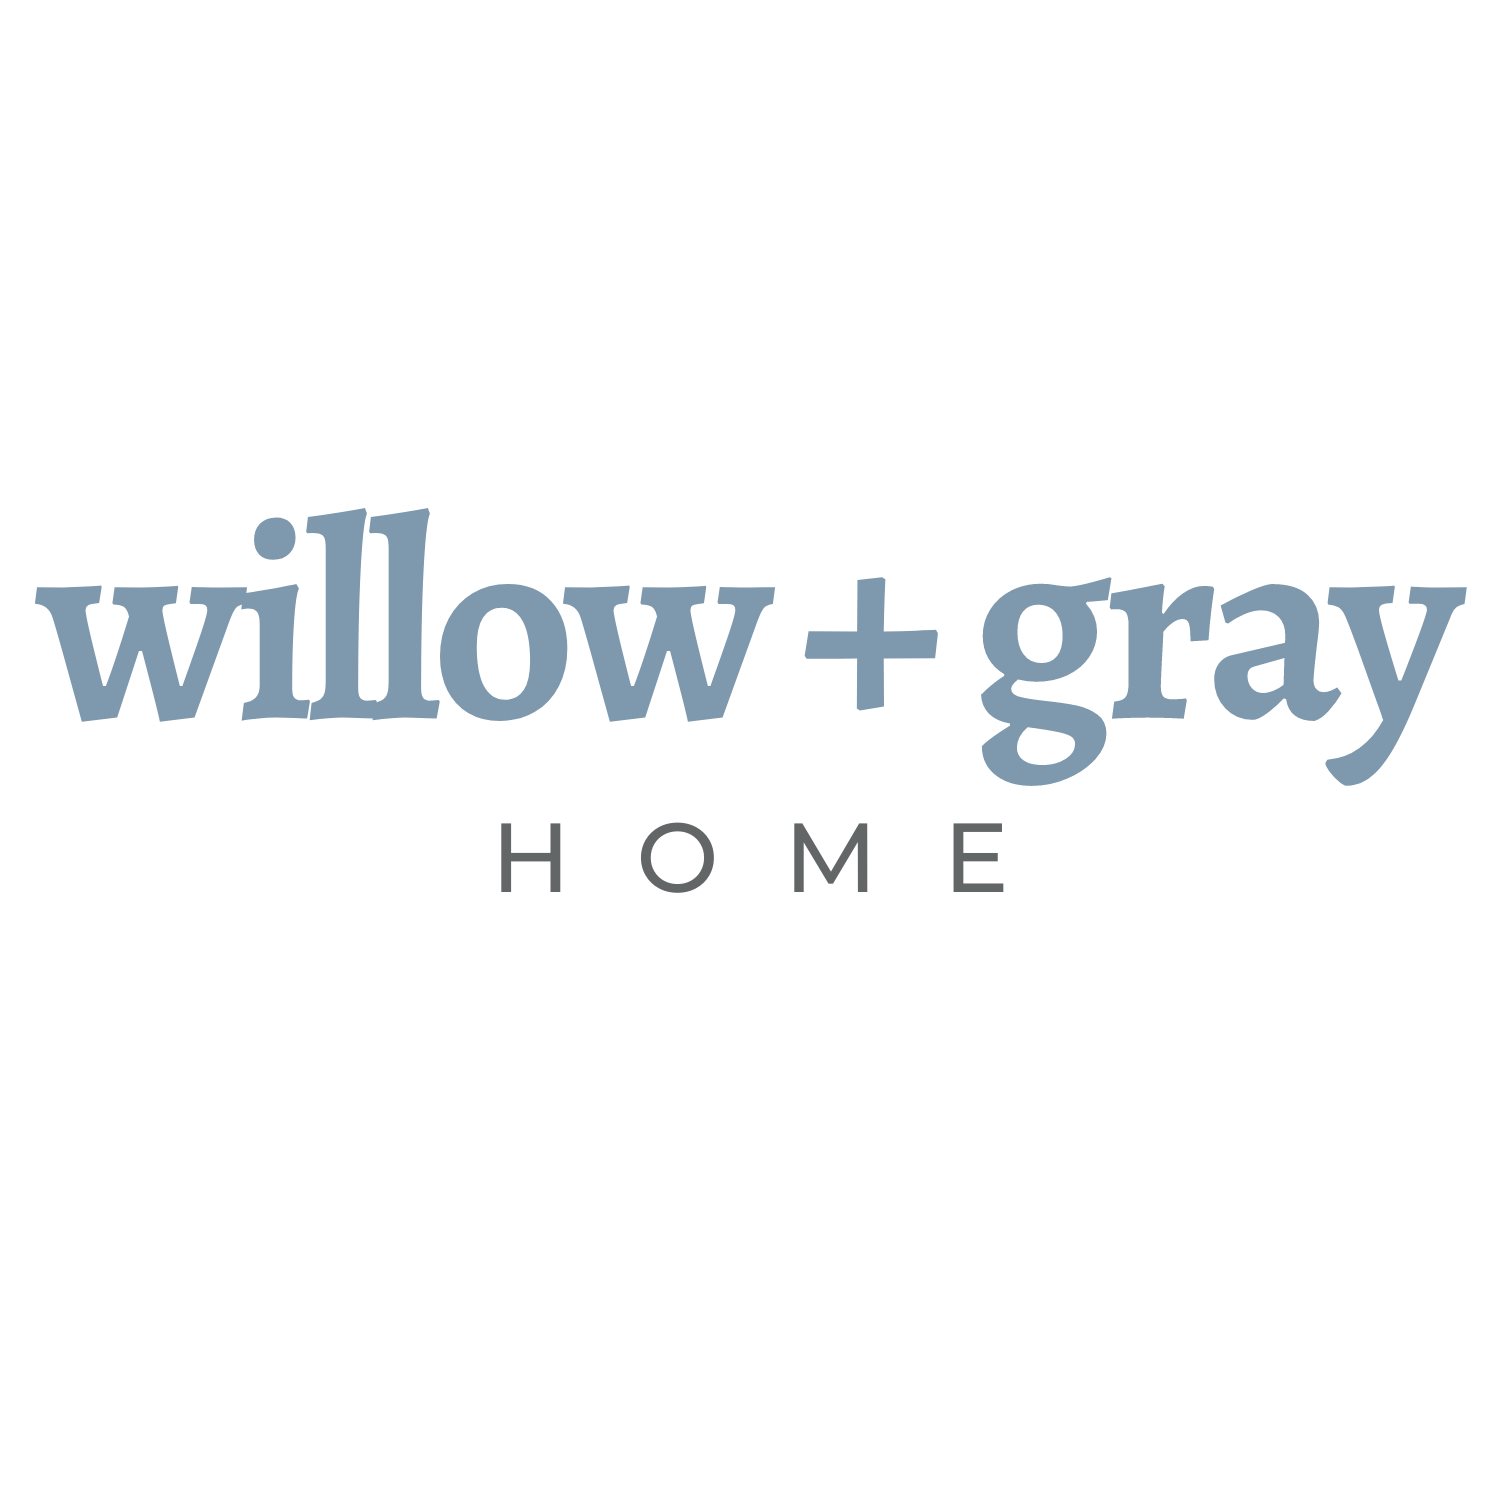 In Partnership with willowgrayhome.com